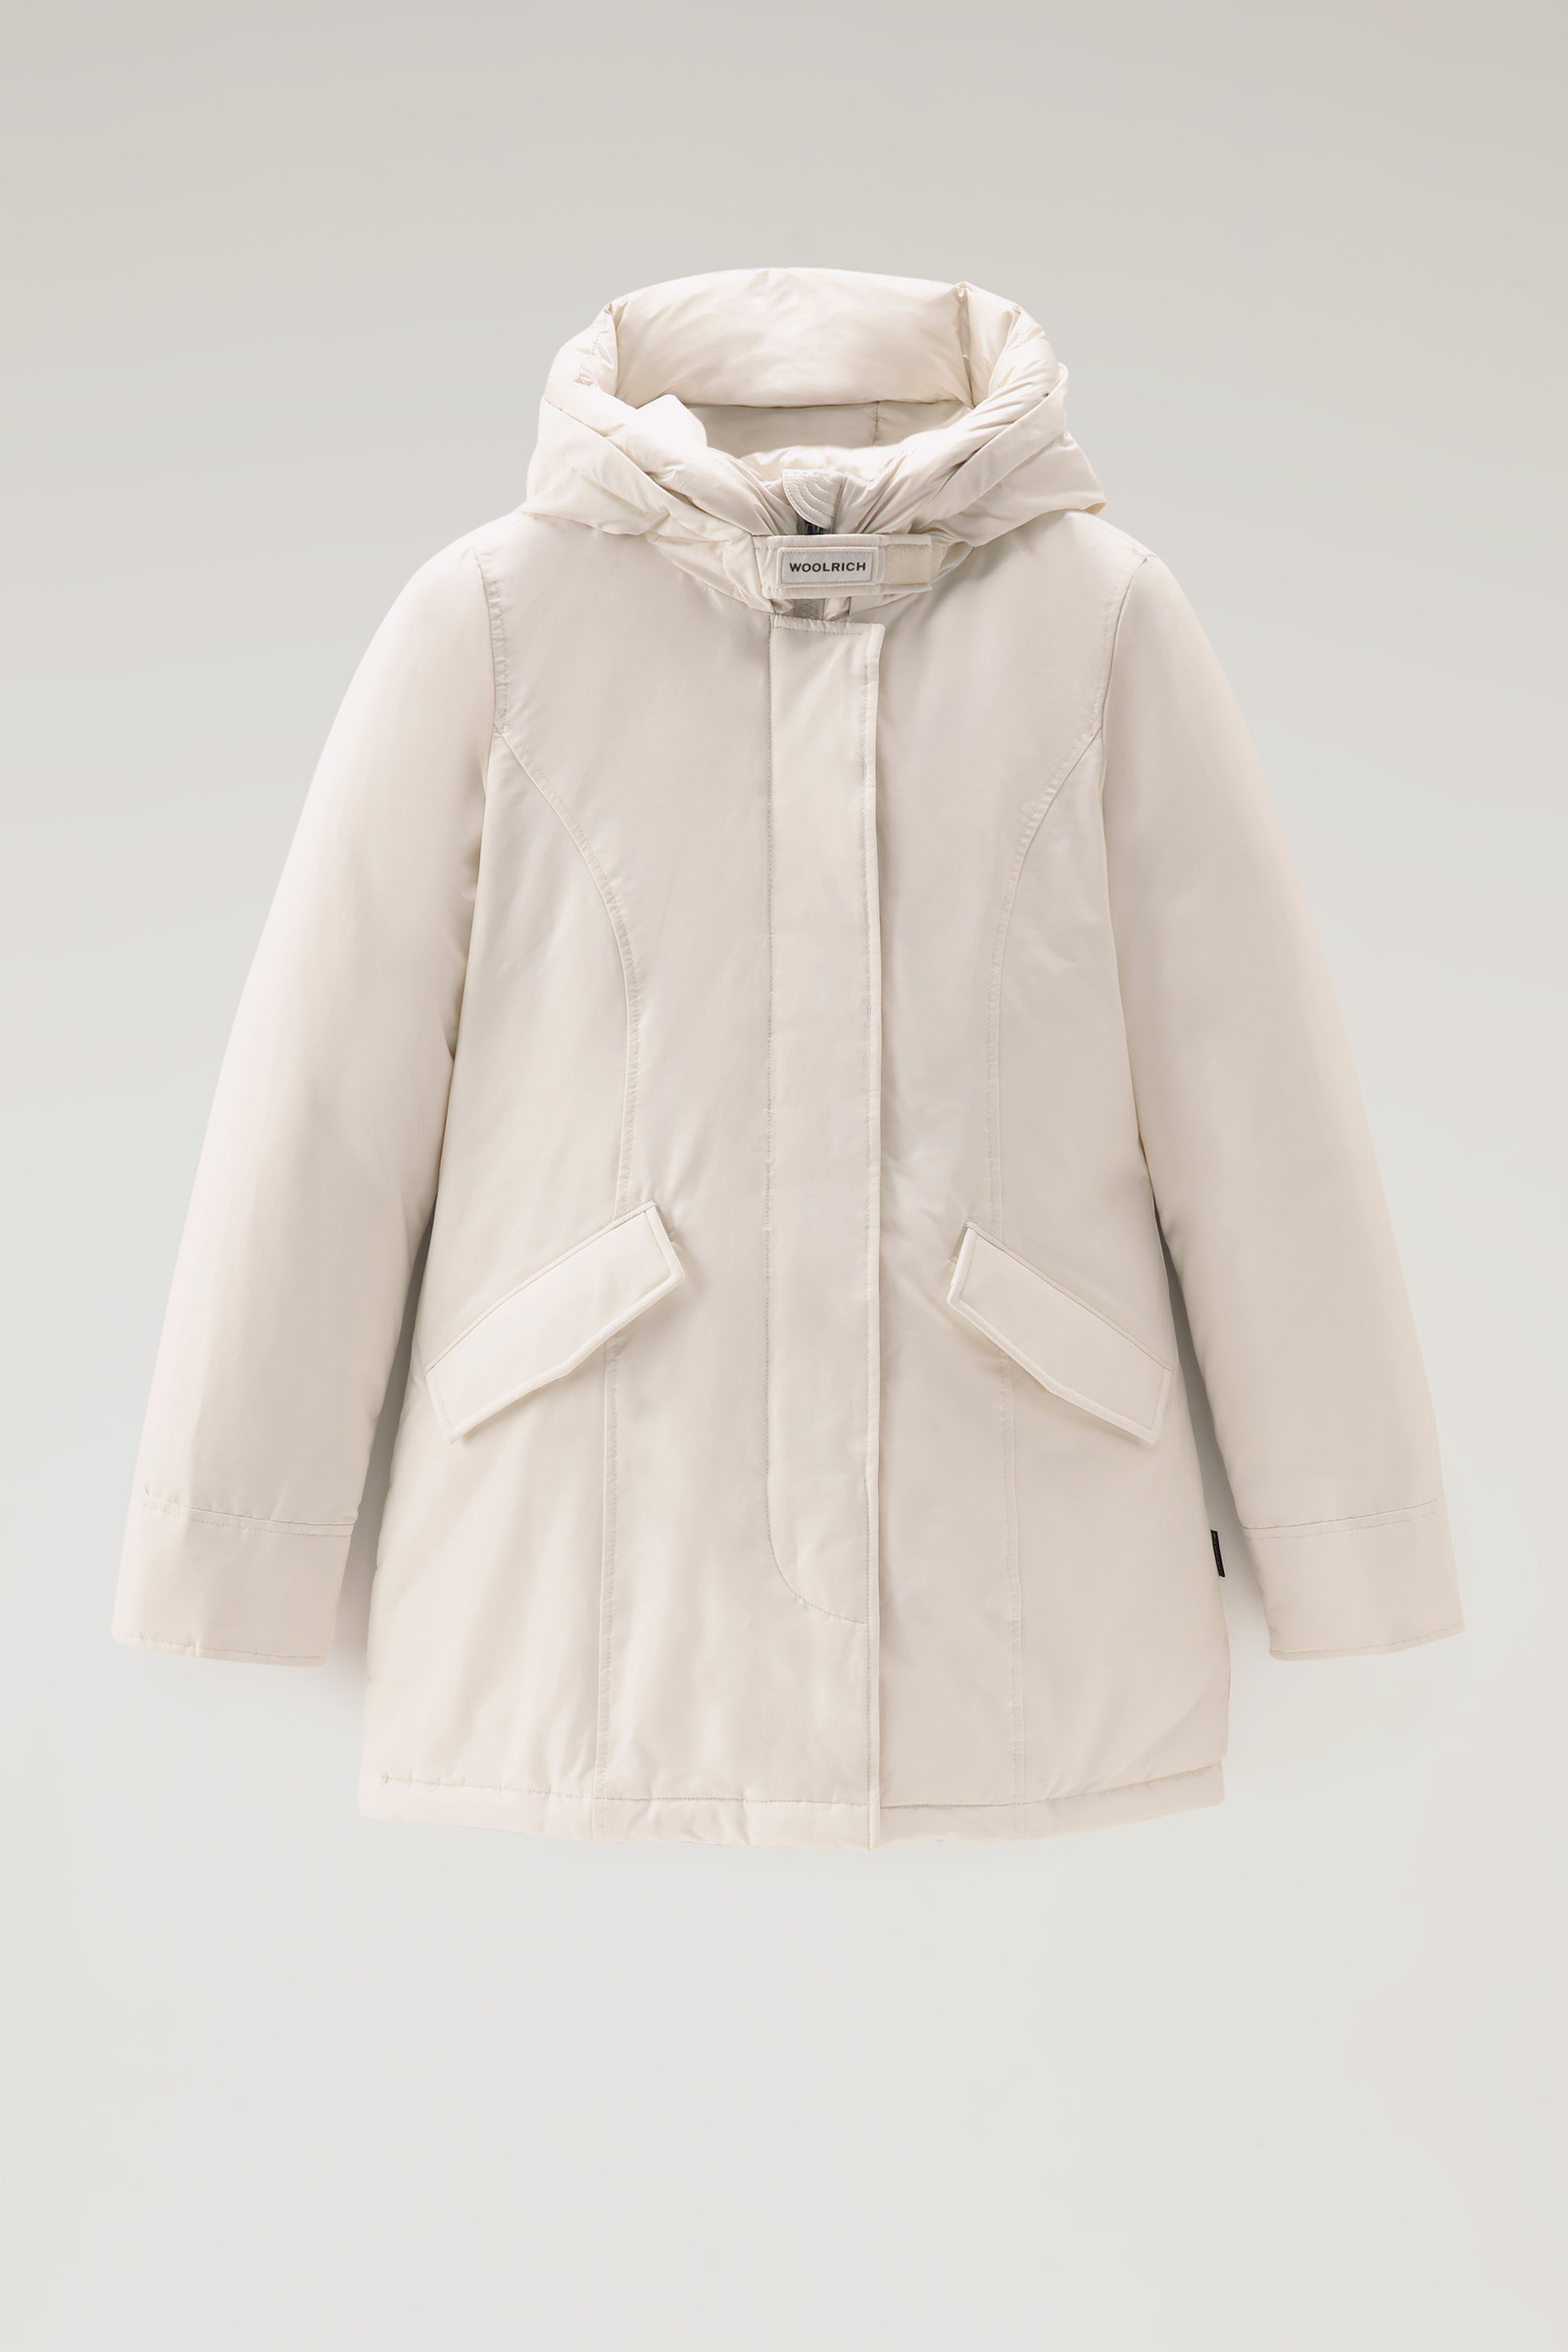 vals Overtuiging cafe Women's Arctic Parka in Ramar Cloth White | Woolrich USA